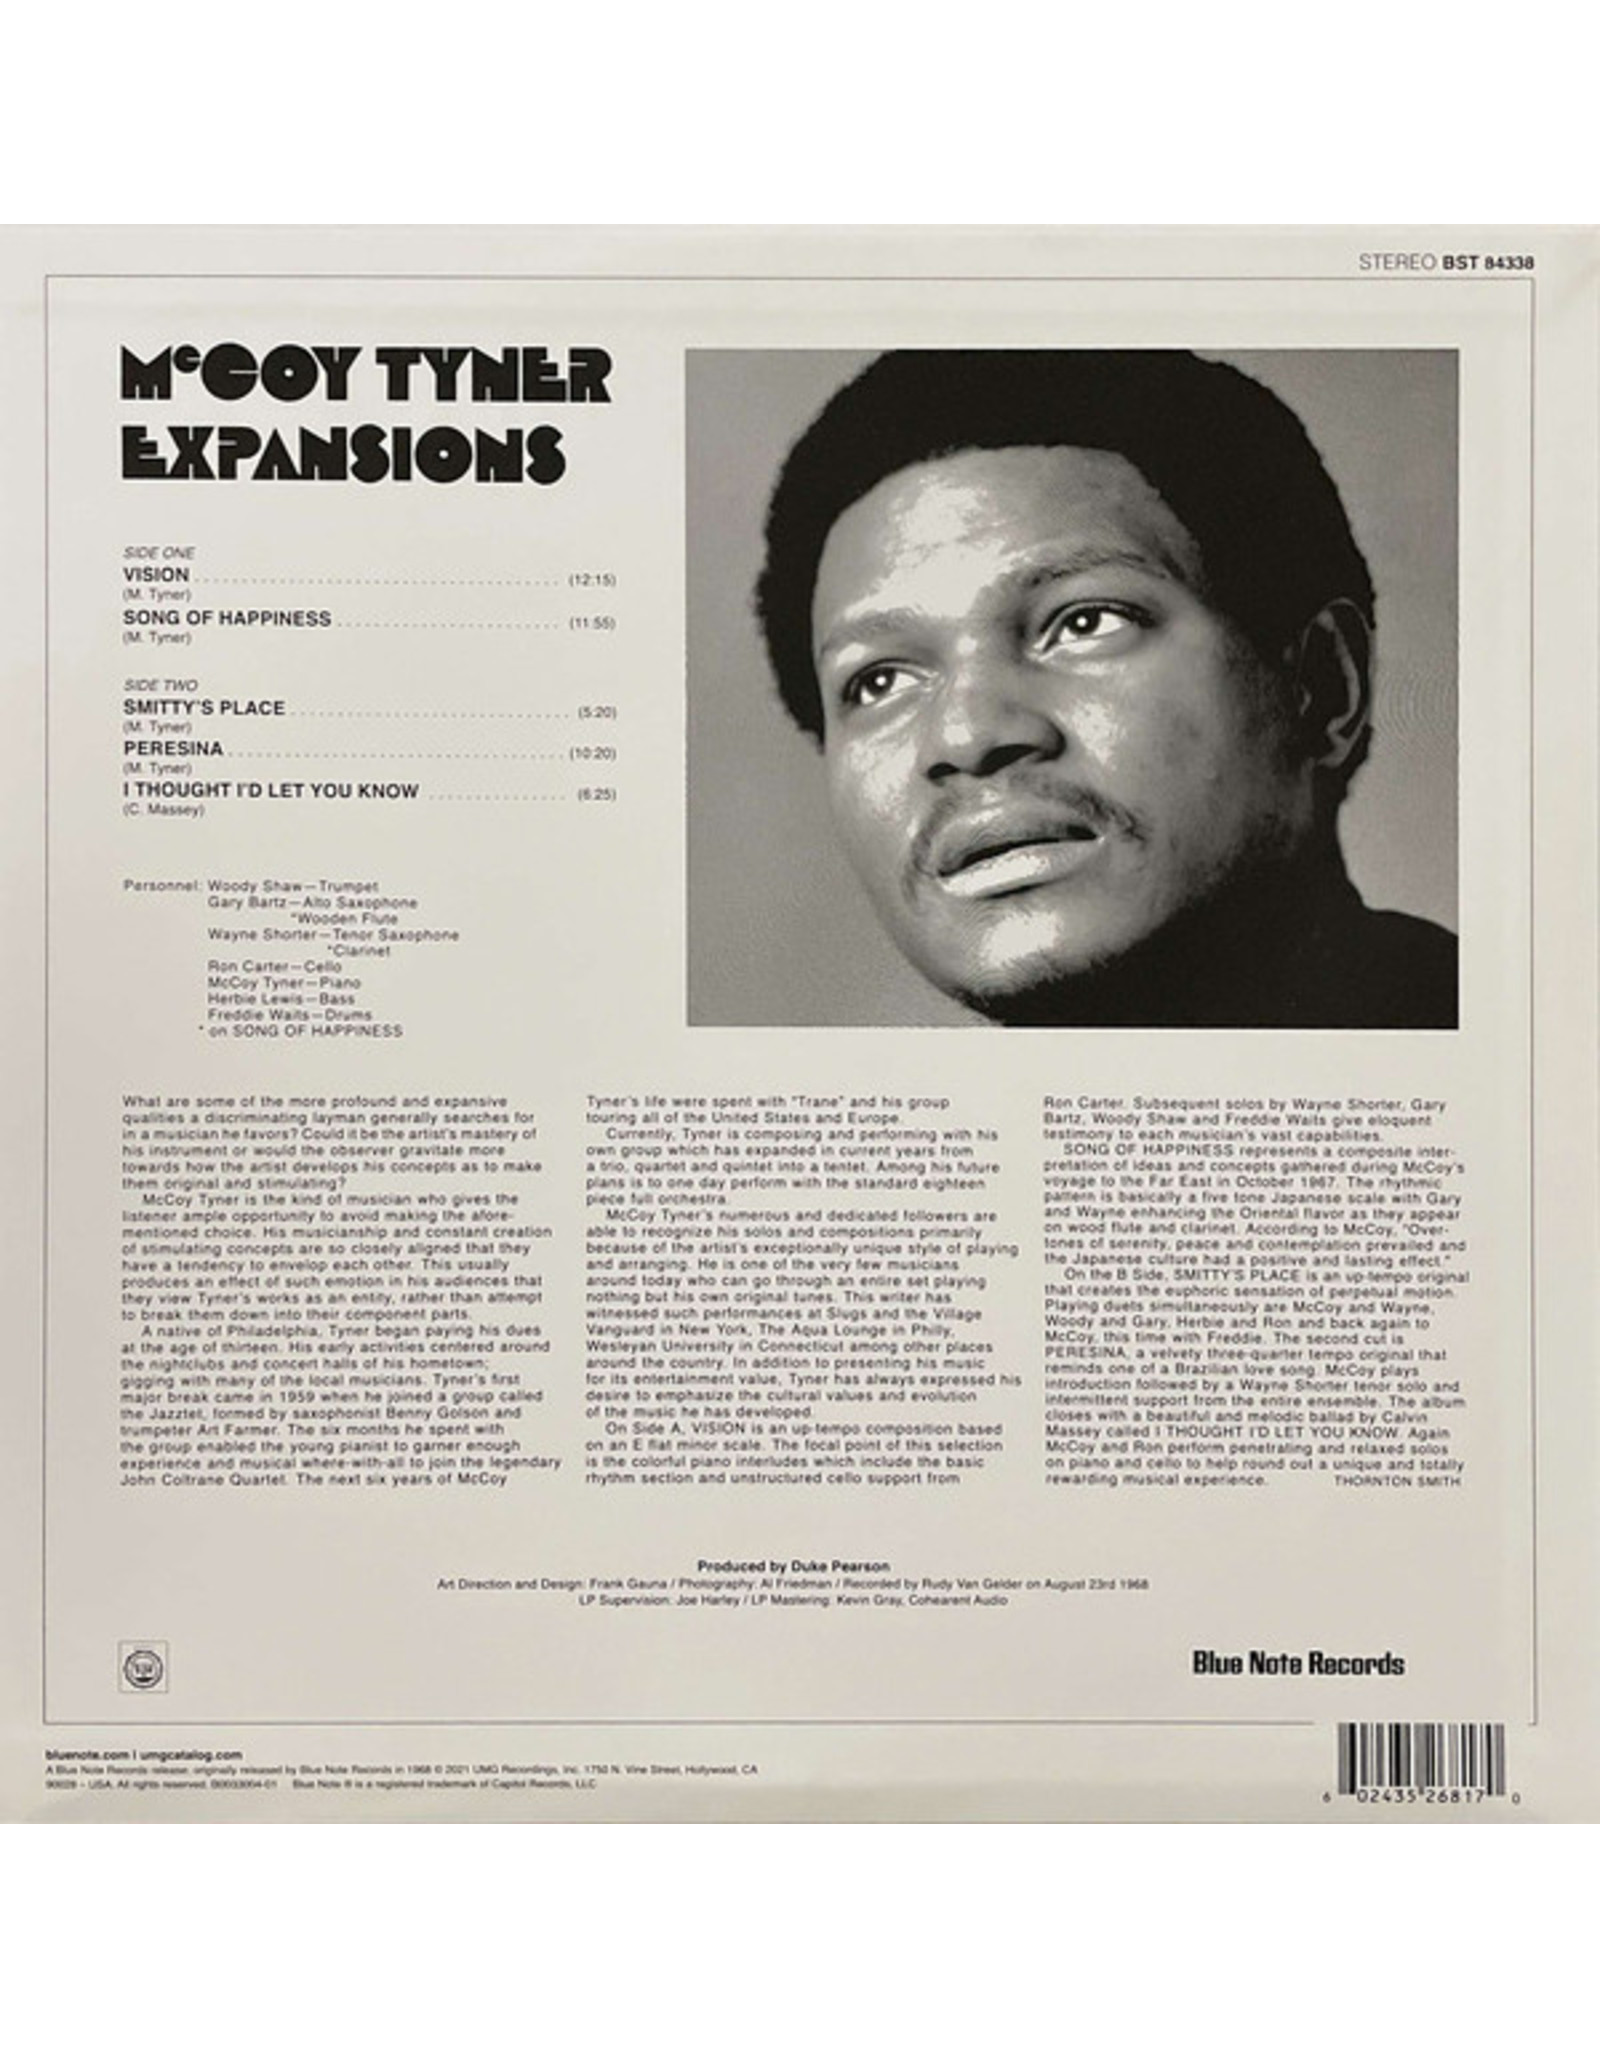 McCoy Tyner - Expansions (Blue Note Tone Poet)